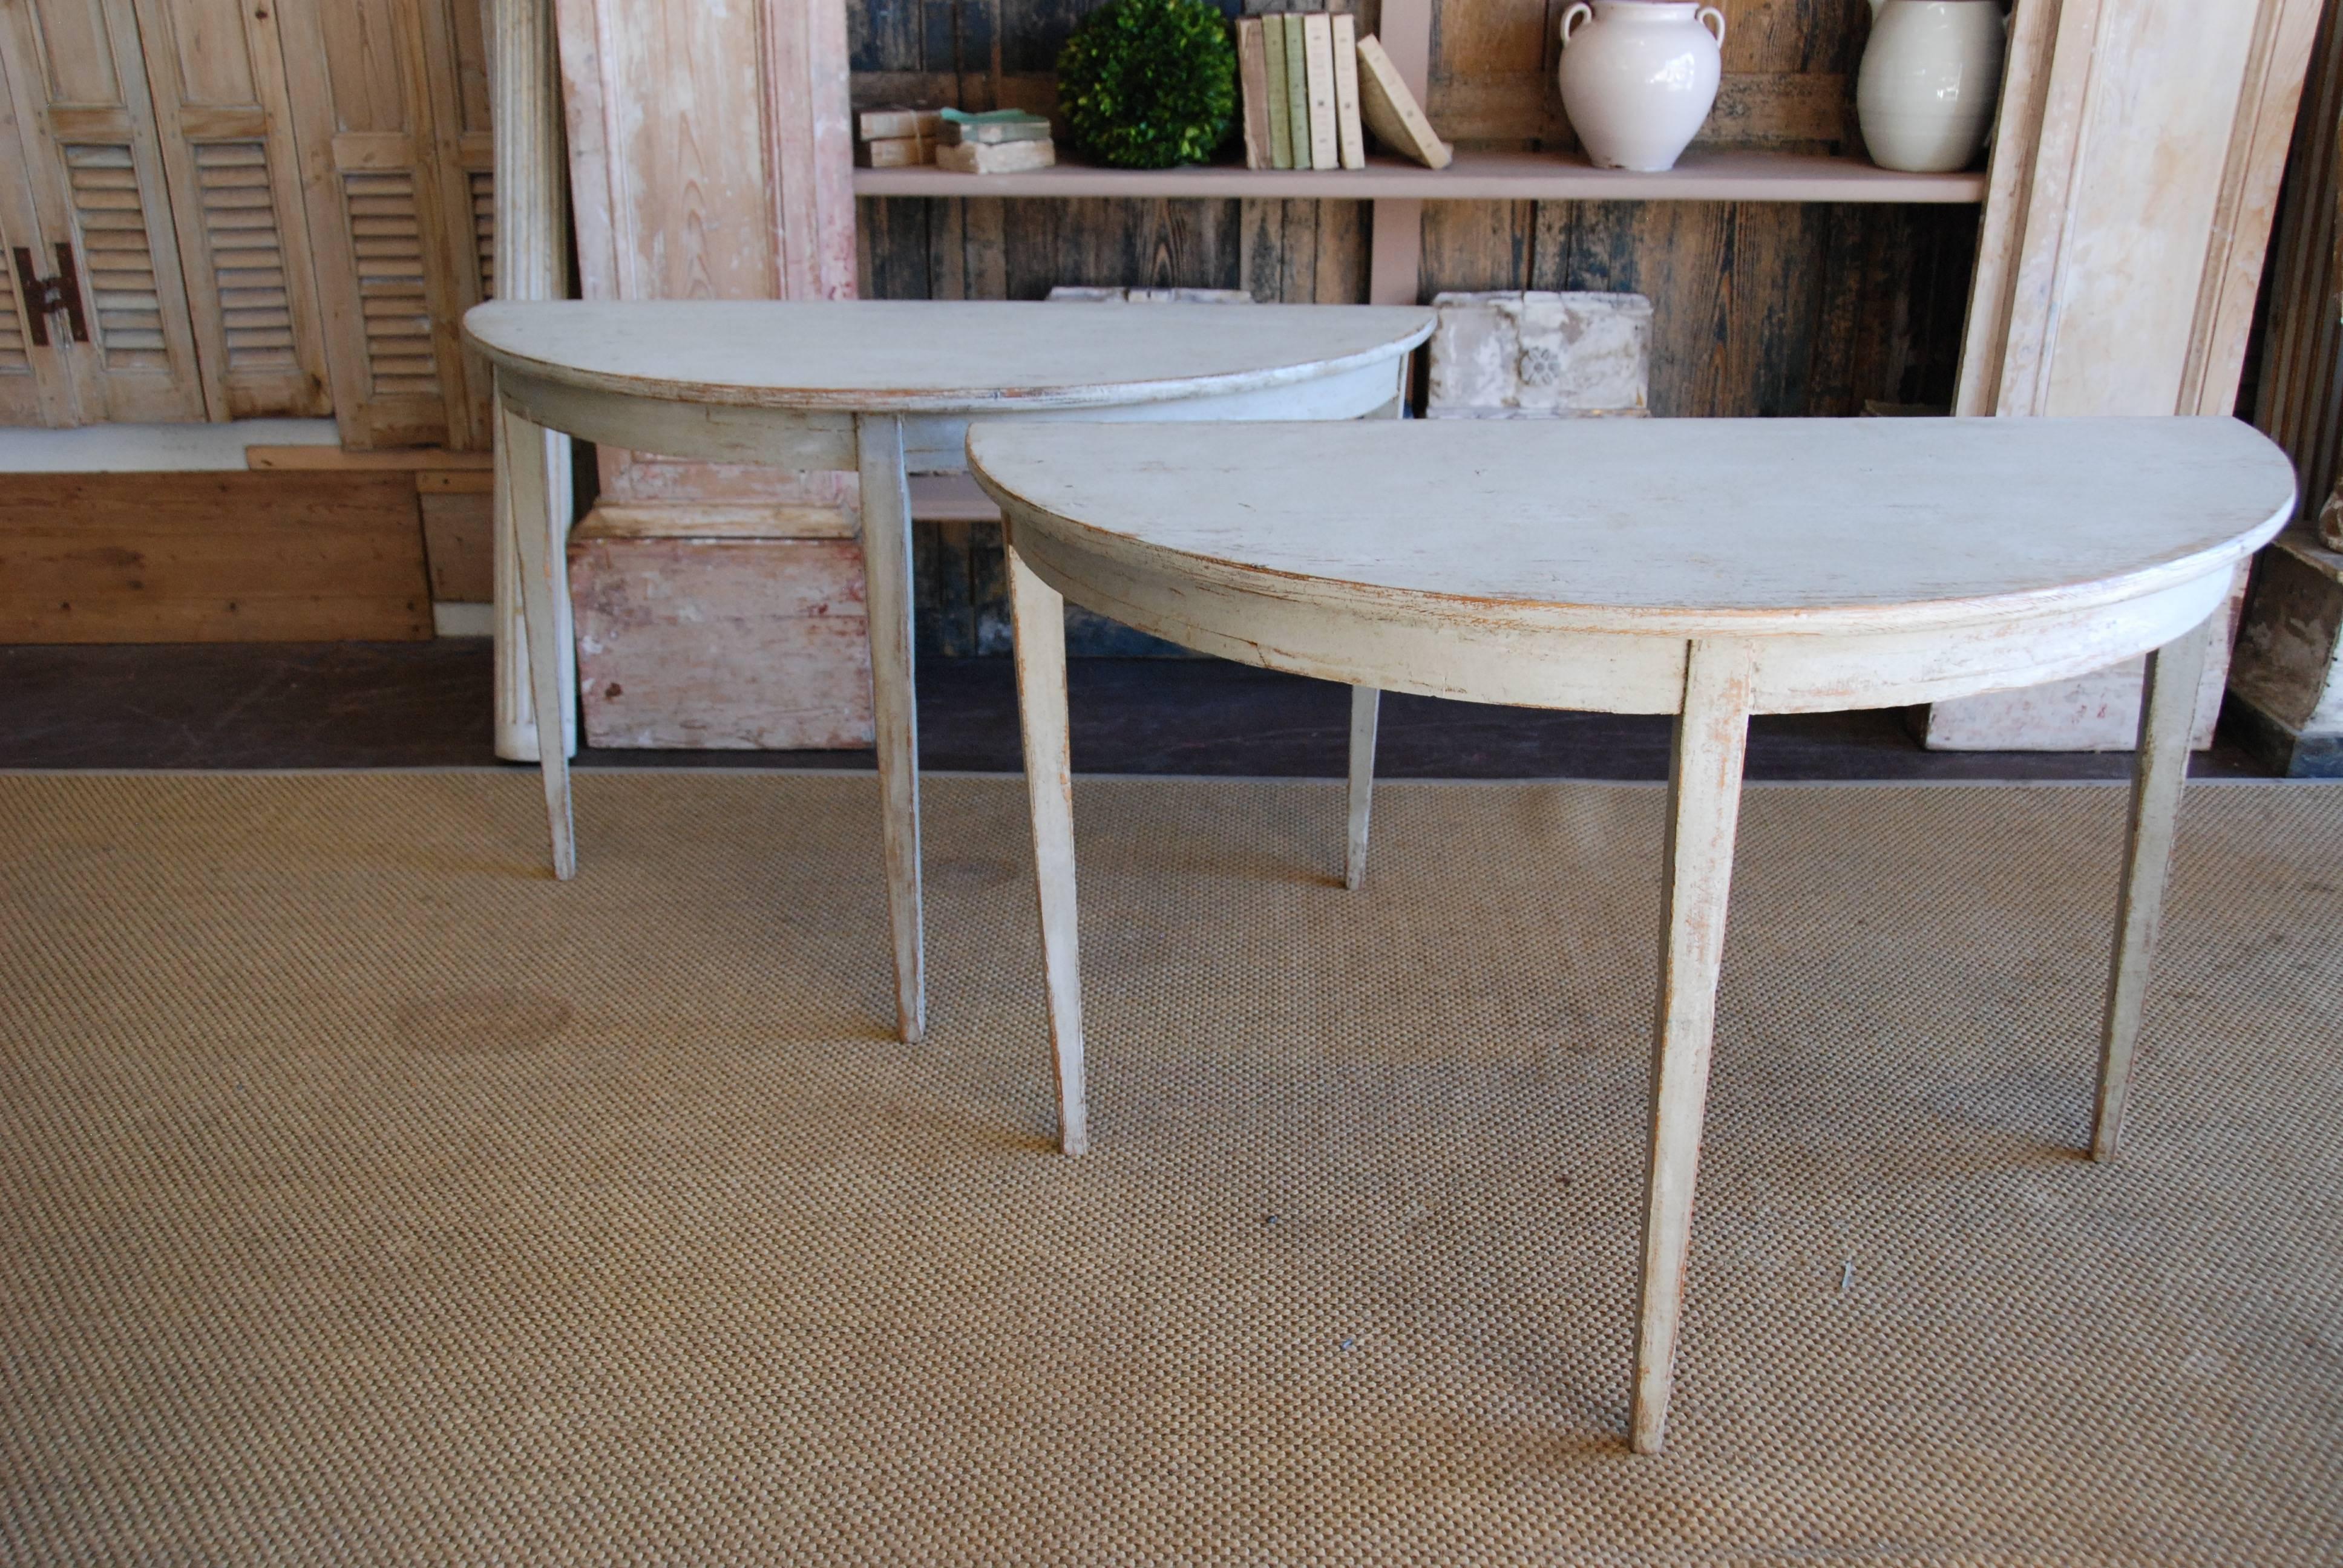 Pair of 19th century Swedish demilune tables with rounded base and tapered legs. Can be put together to form a round table. Cream, white color.